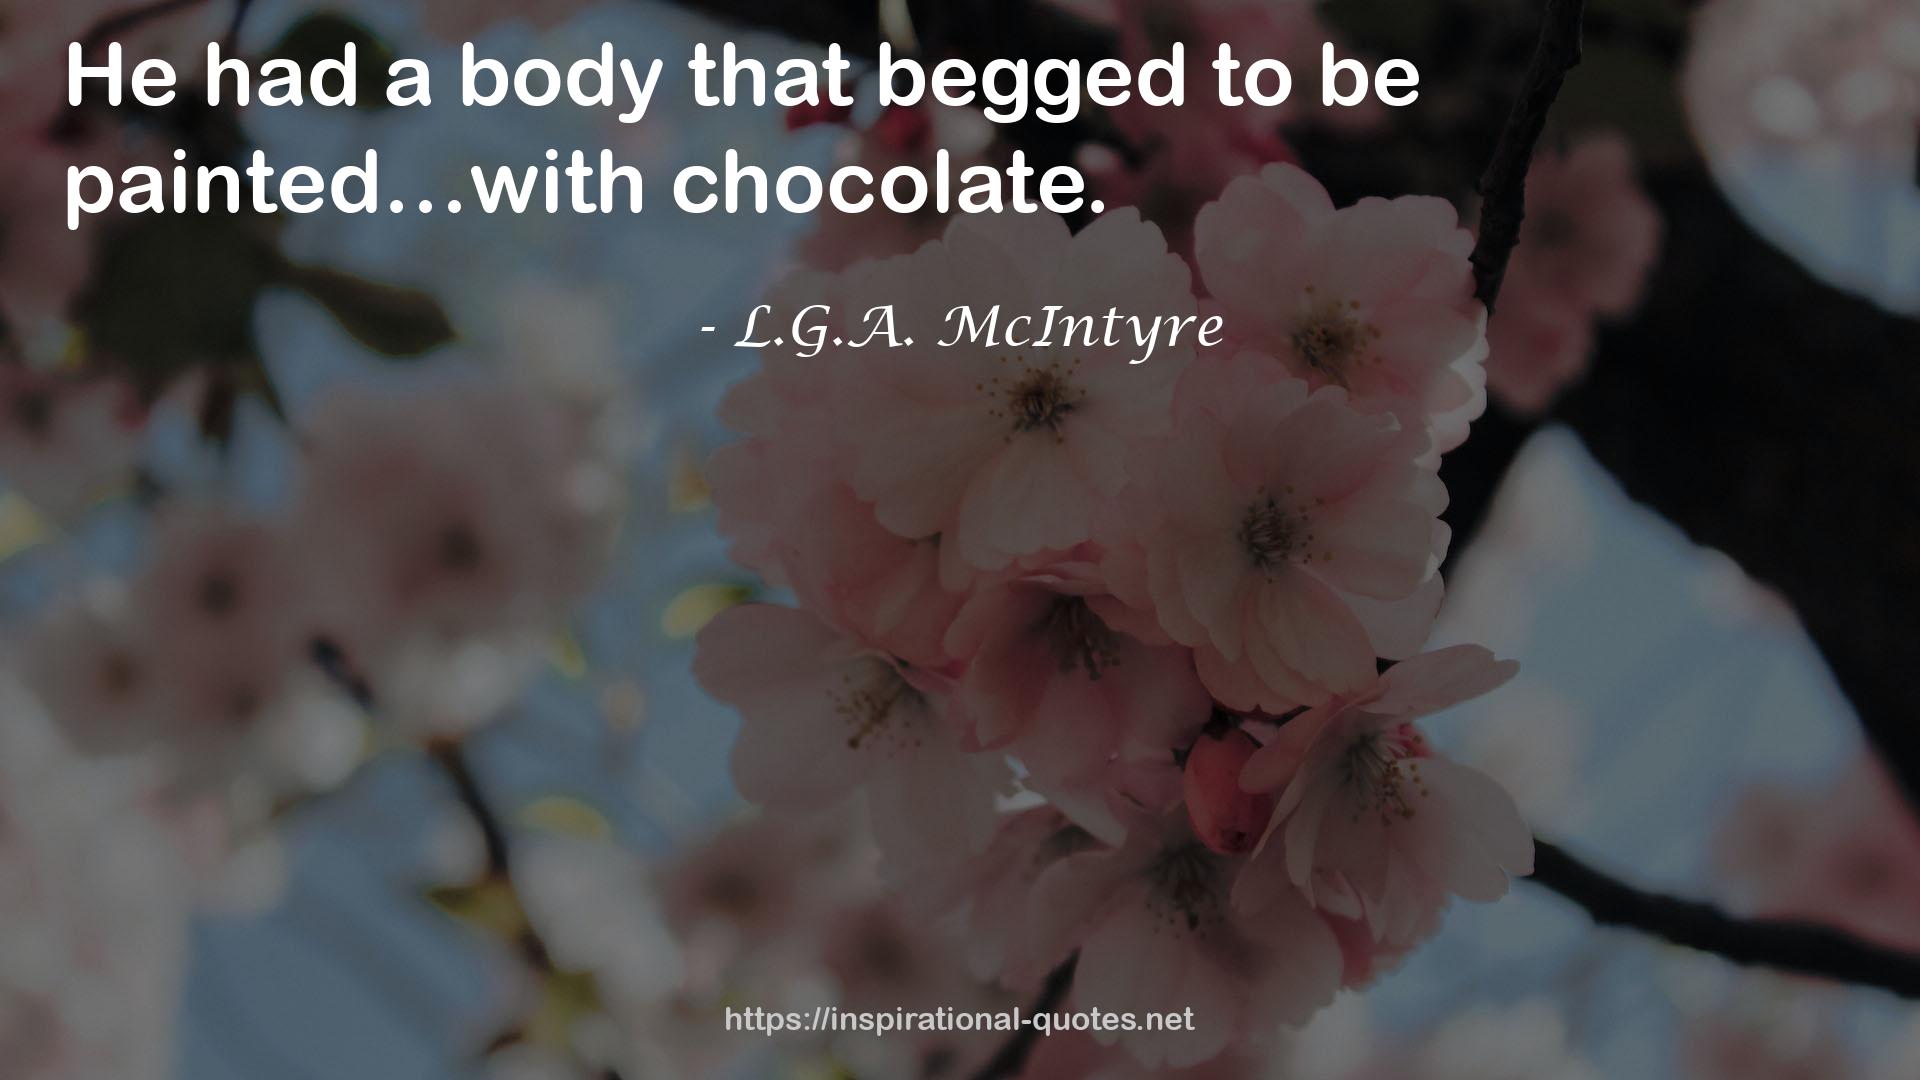 L.G.A. McIntyre QUOTES